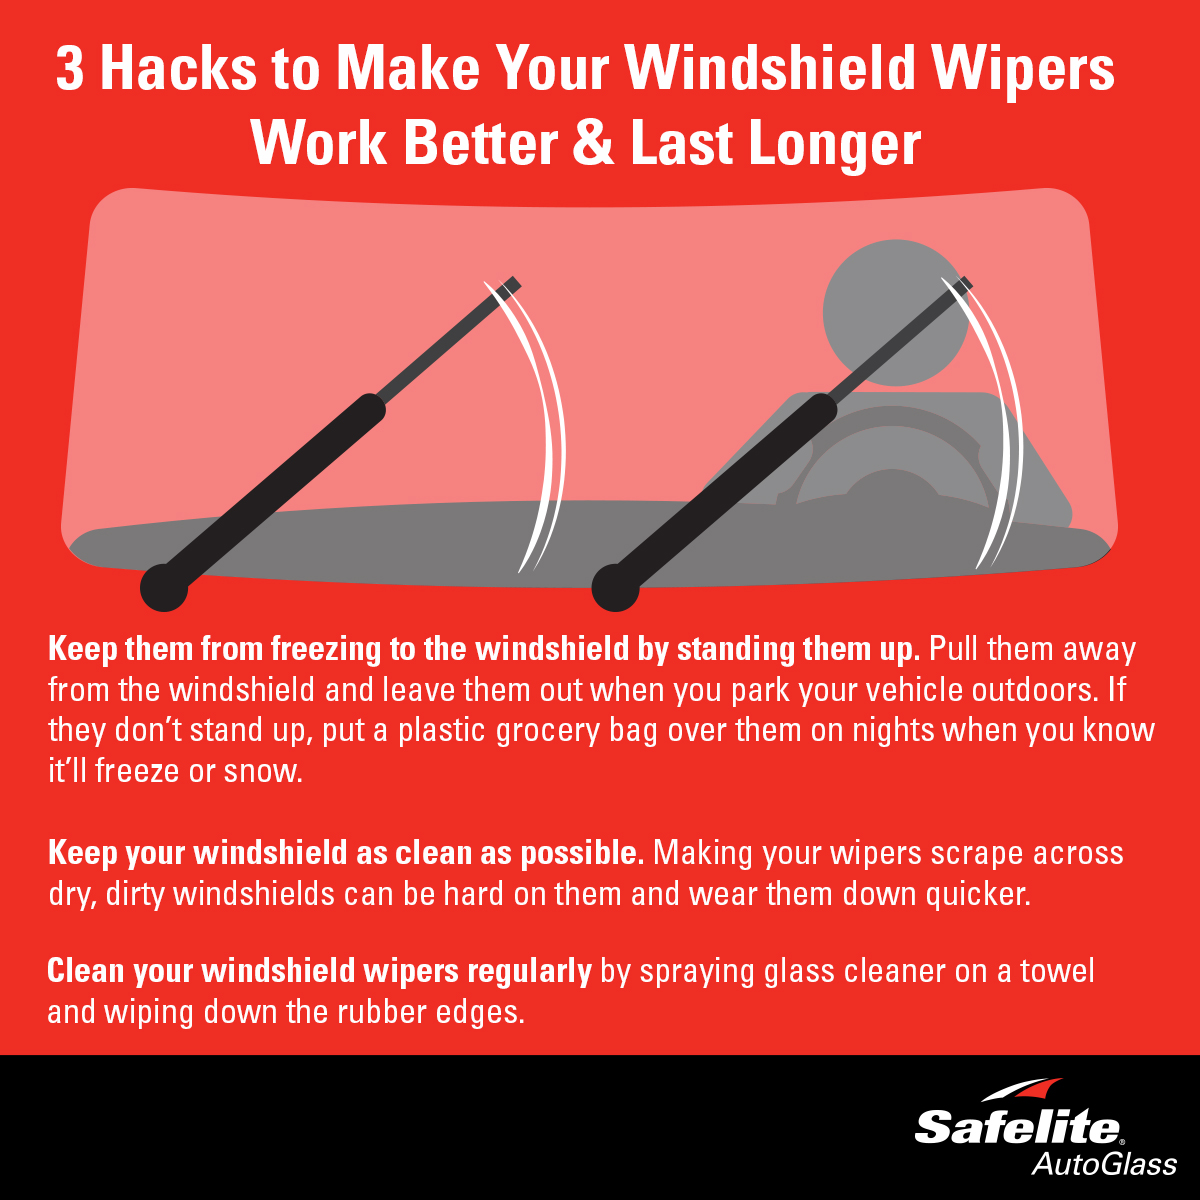 These three tips should help you to care for your windshield wipers.